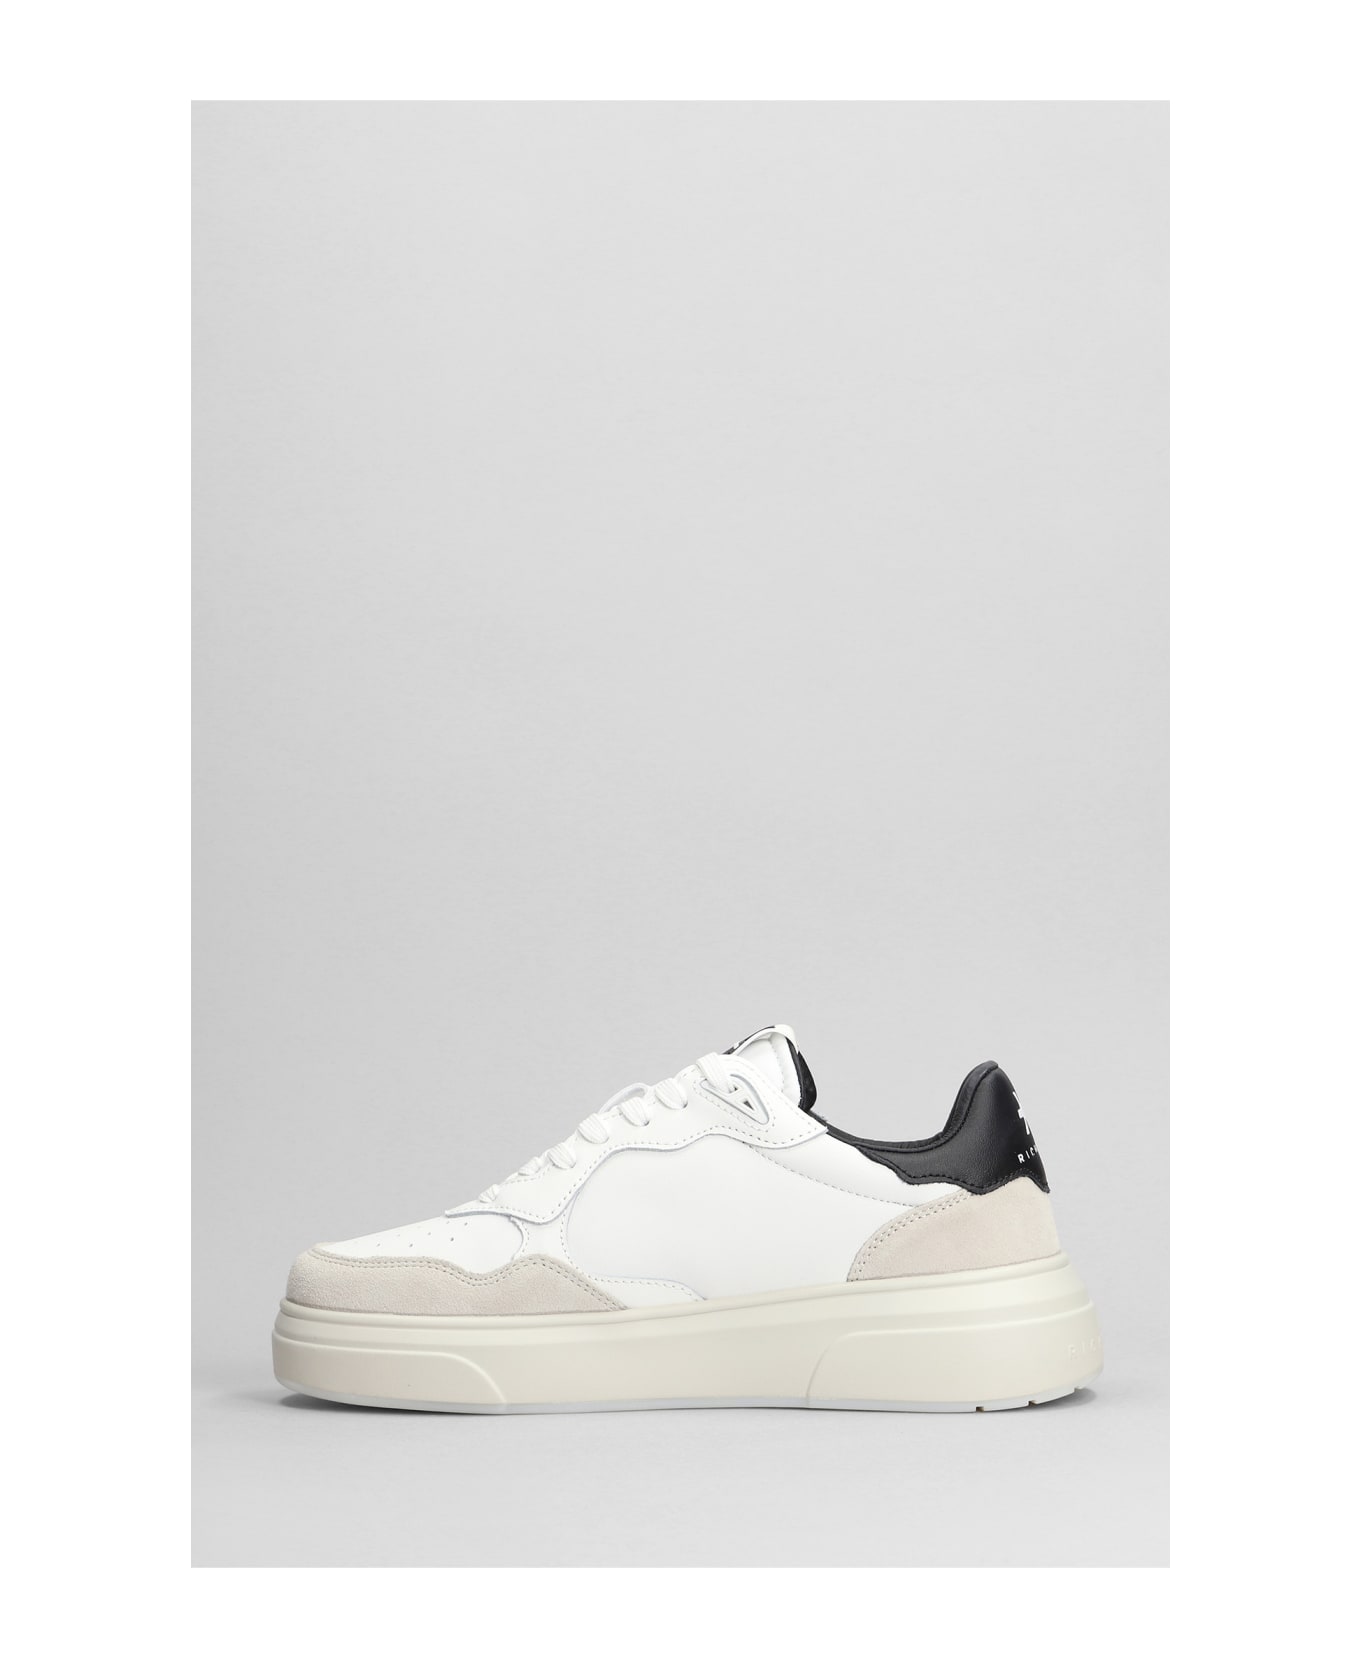 John Richmond Sneakers In White Suede And Leather - white スニーカー